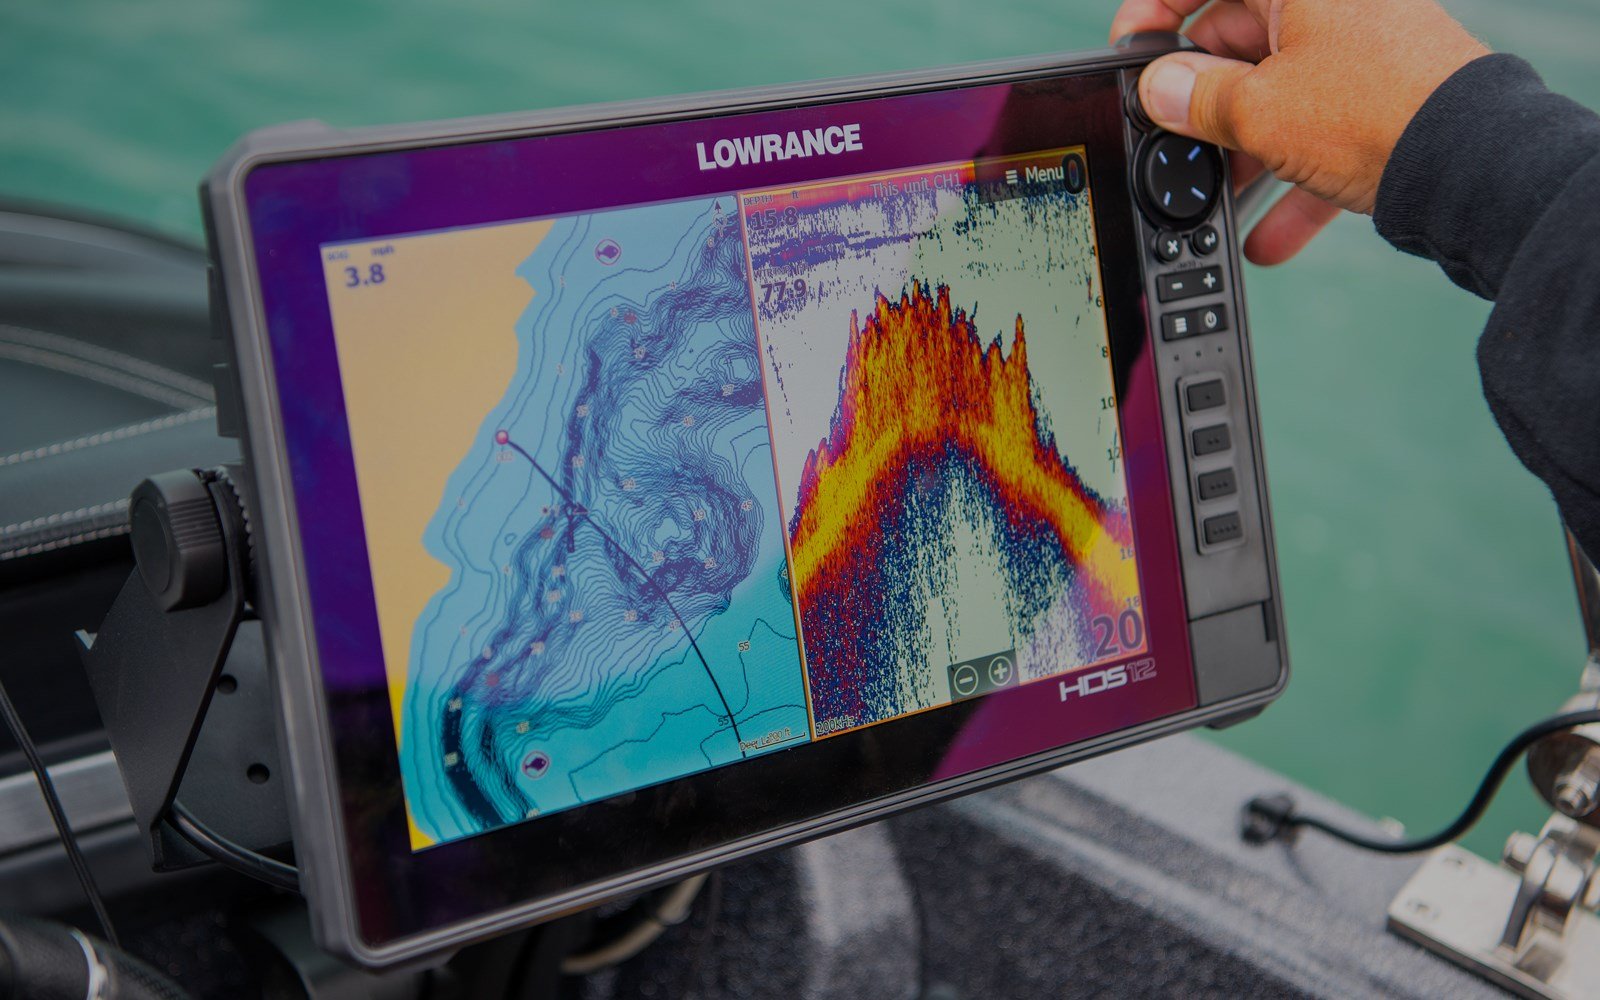 How to update lowrance software